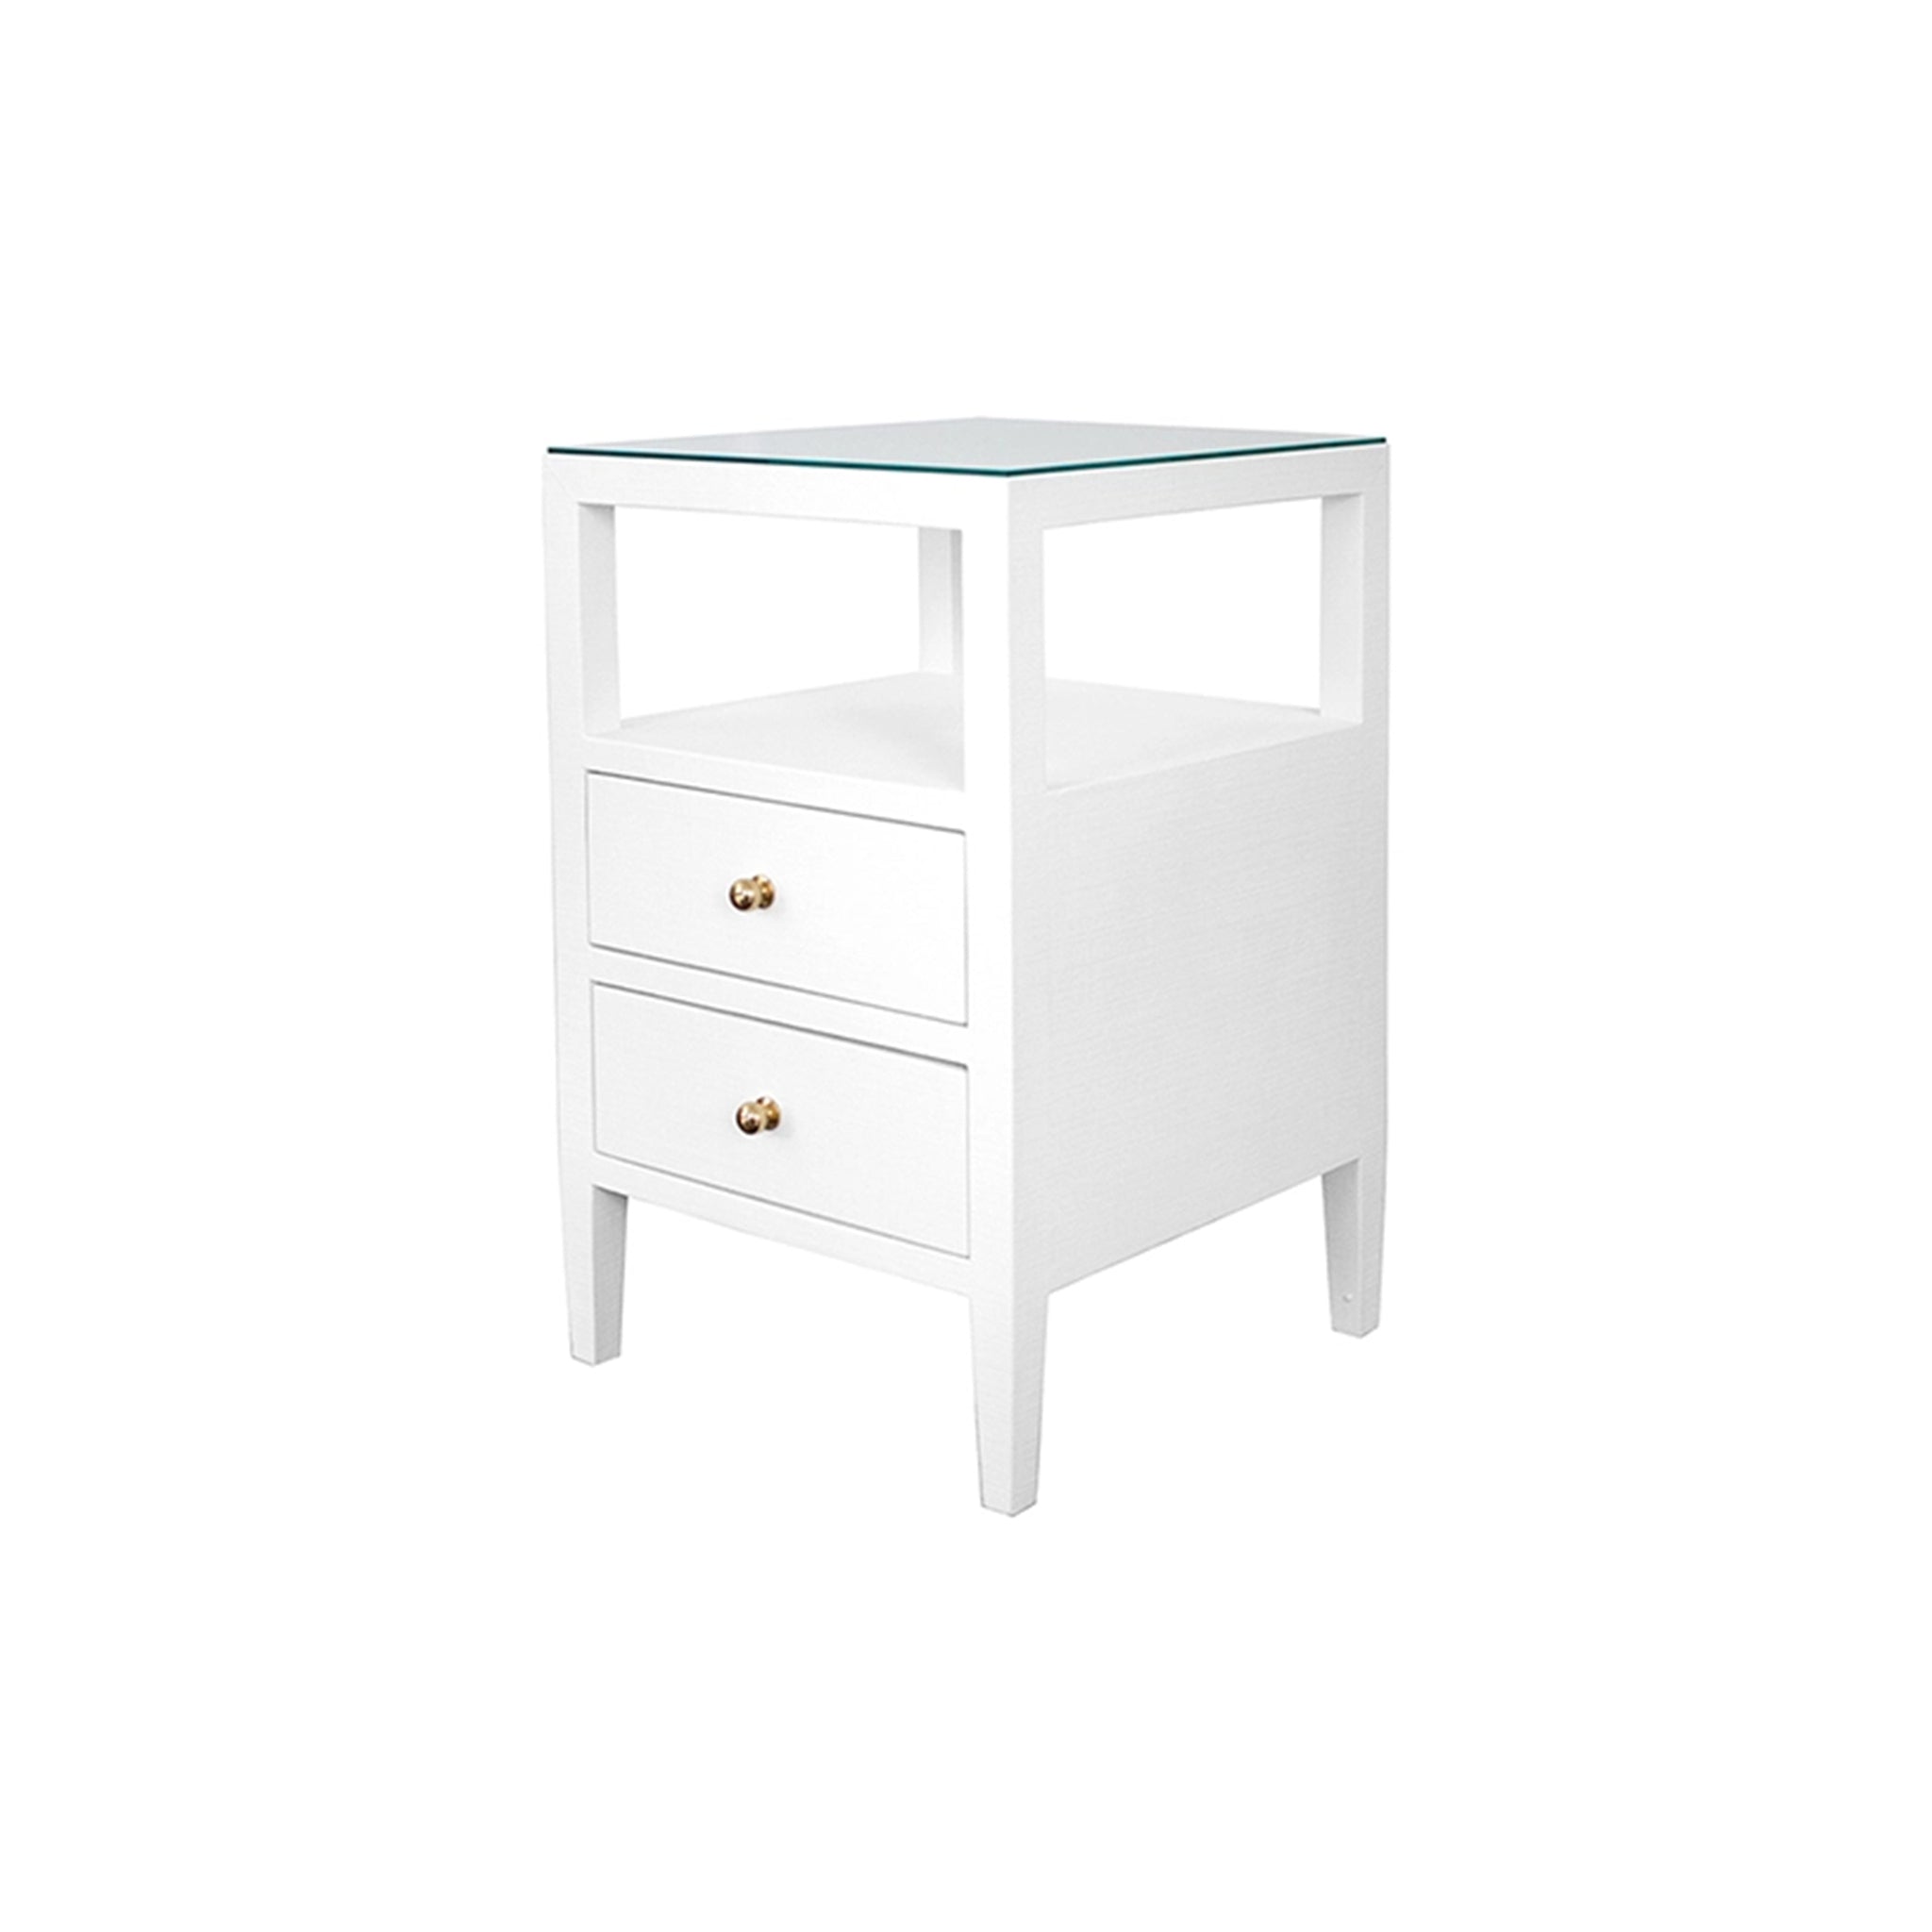 Darby Side Table